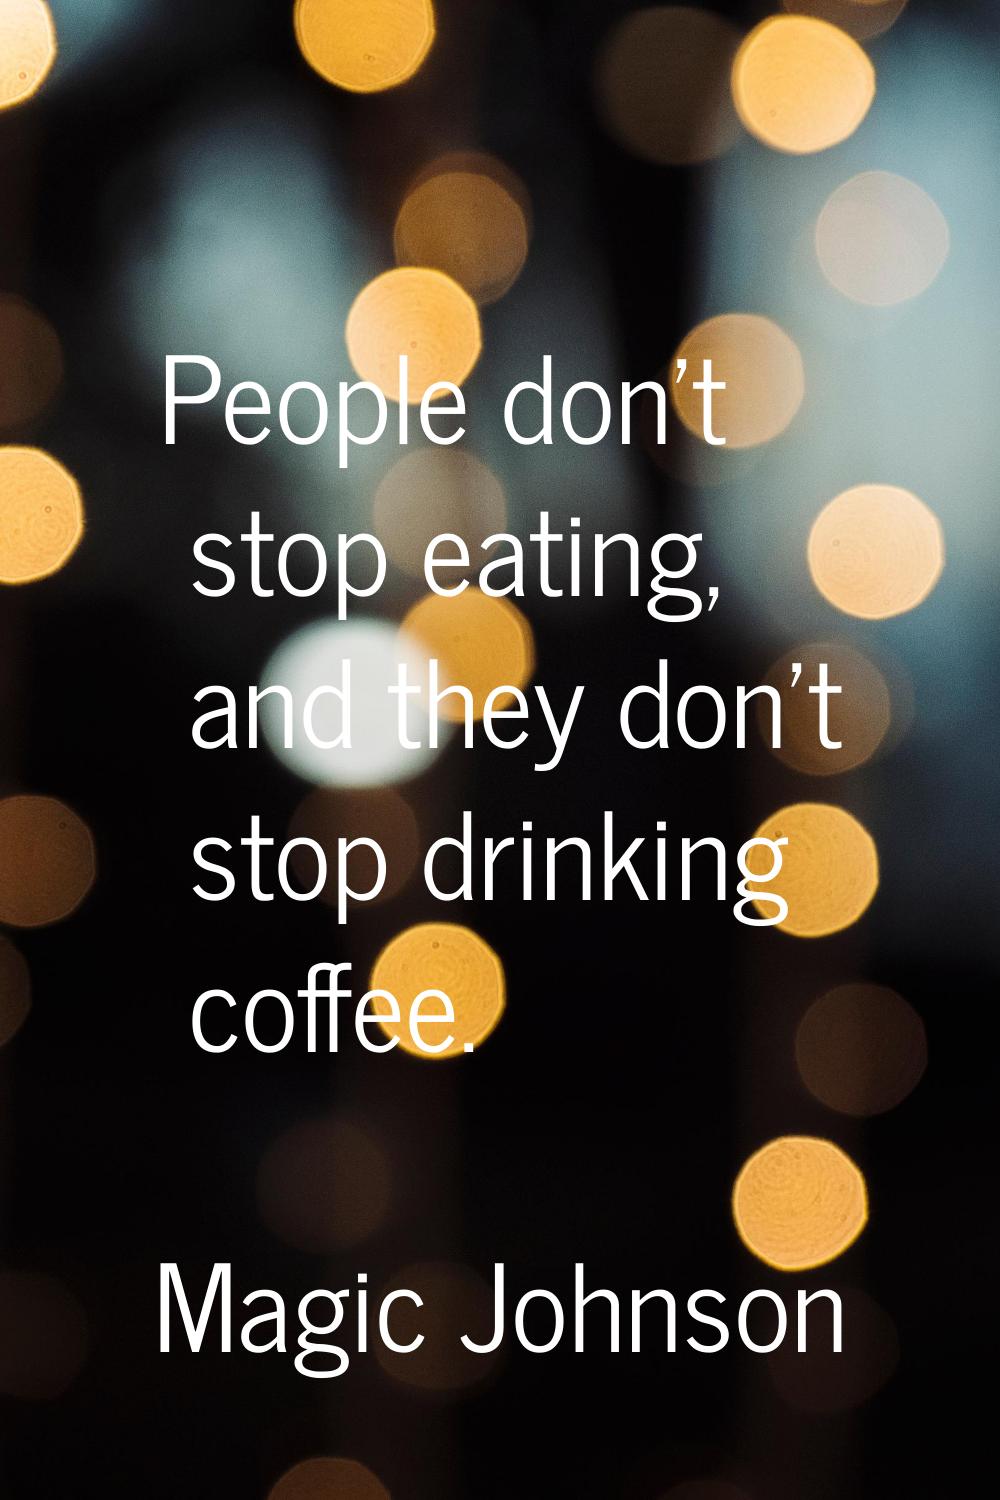 People don't stop eating, and they don't stop drinking coffee.